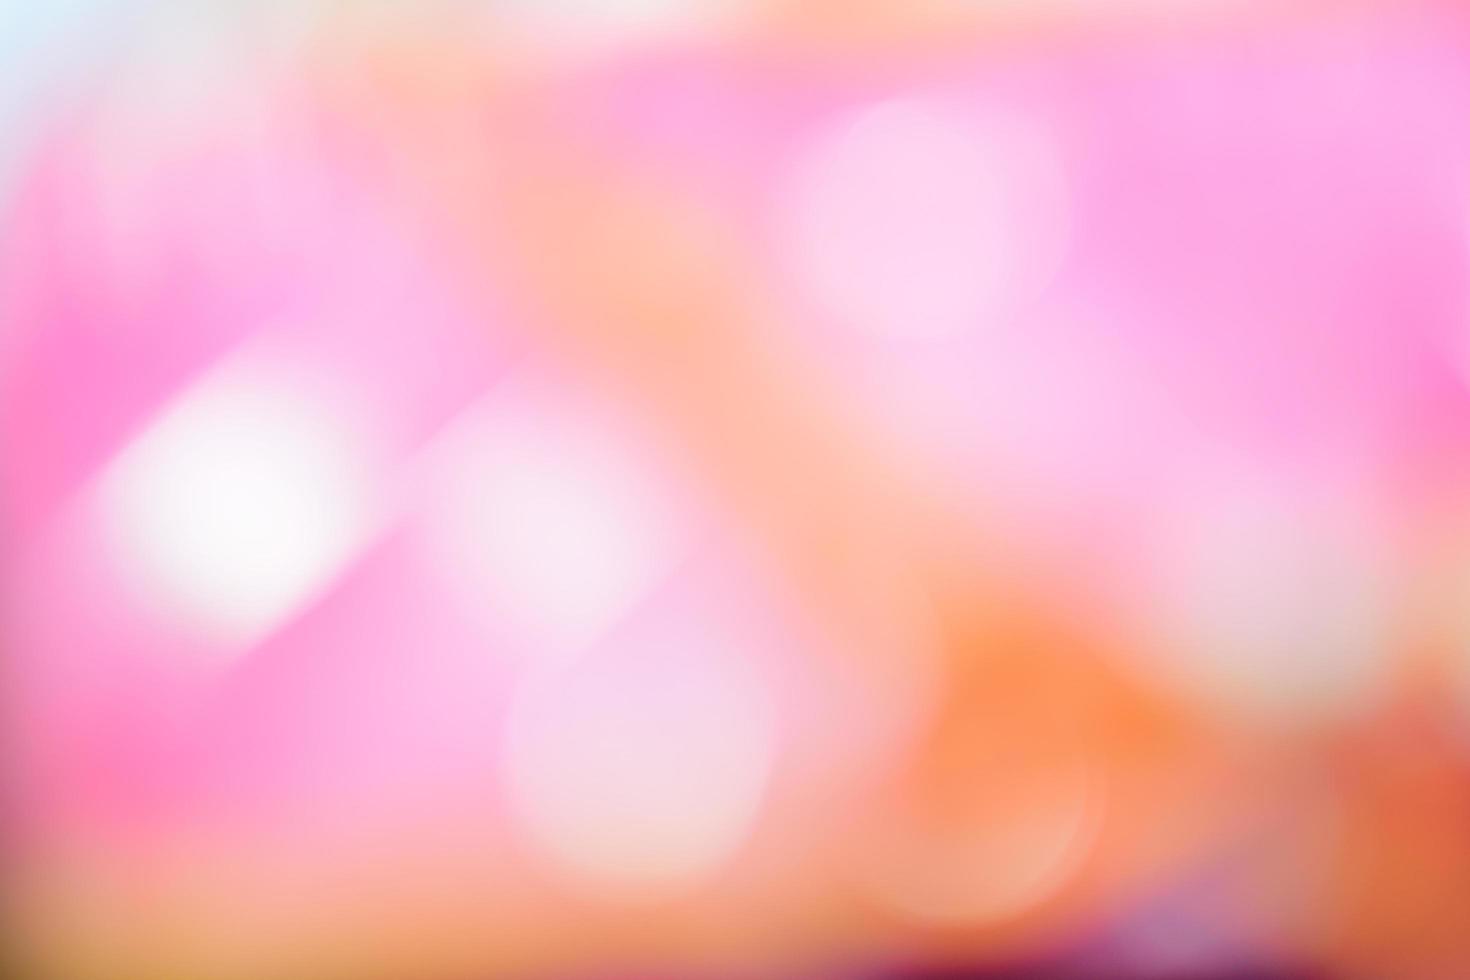 Colorful blurred background photo